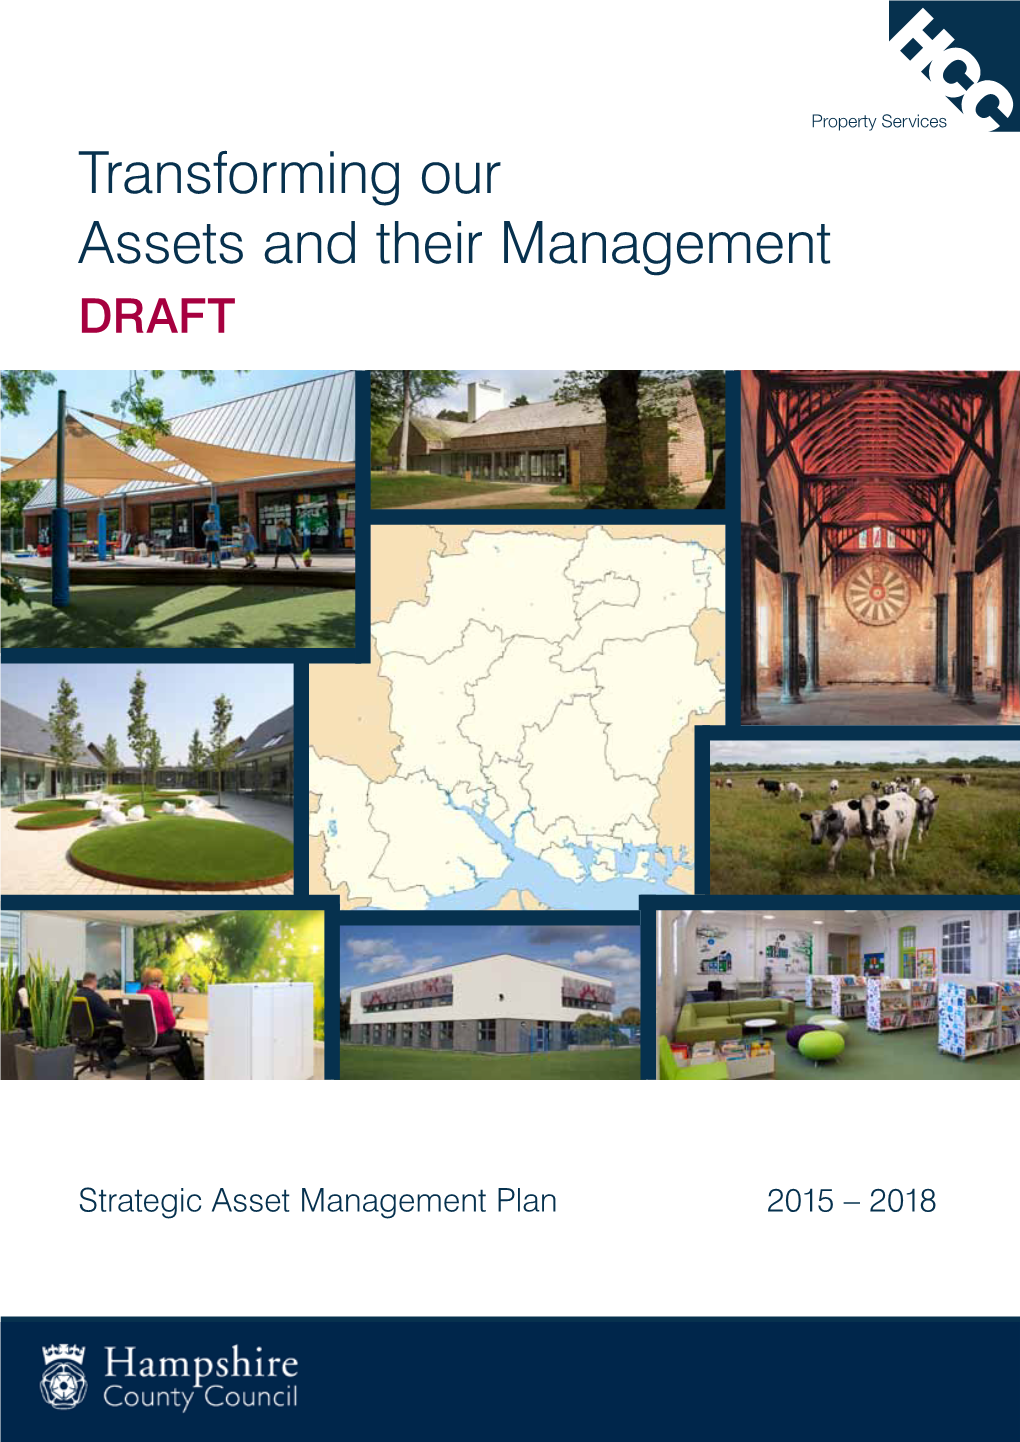 Transforming Our Assets and Their Management DRAFT